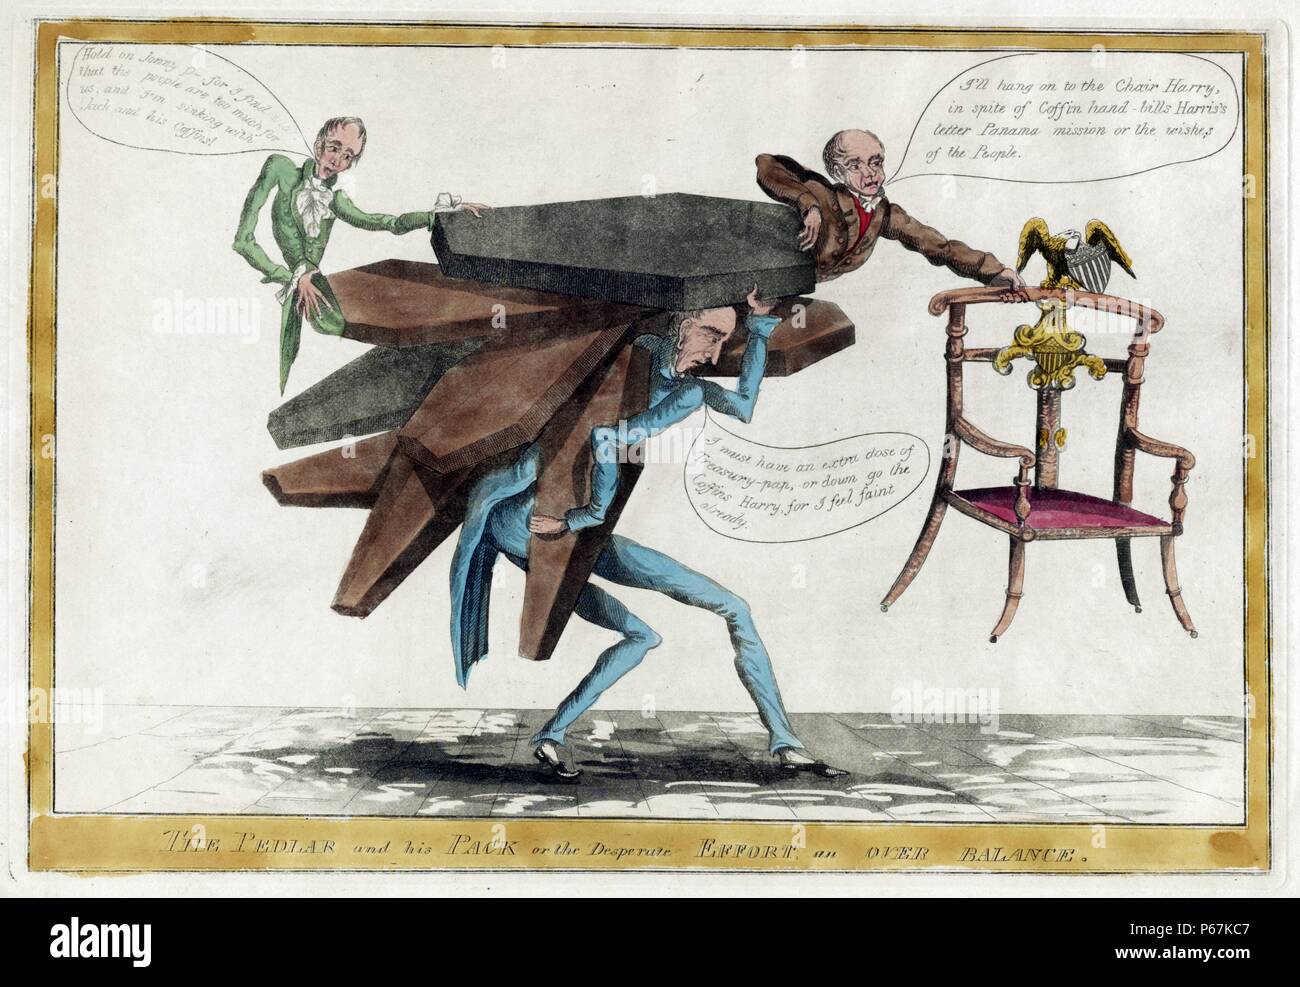 The pedlar and his pack or The desperate effort, an over balance' A satire on the reverse impact of John Binns's anti-Jackson 'coffin handbill' campaign during the presidential race of 1828. Editor-publisher Binns supports on his back a large load of coffins, upon which are figures of Henry Clay (left) and incumbent President John Quincy Adams (right). Binns: 'I must have an extra dose of Treasury-pap, or down go the Coffins Harry, for I feel faint already.' Clay: 'Hold on Jonny Q--for I find that the people are too much for us, and I'm sinking with Jack and his Coffins!' Stock Photo